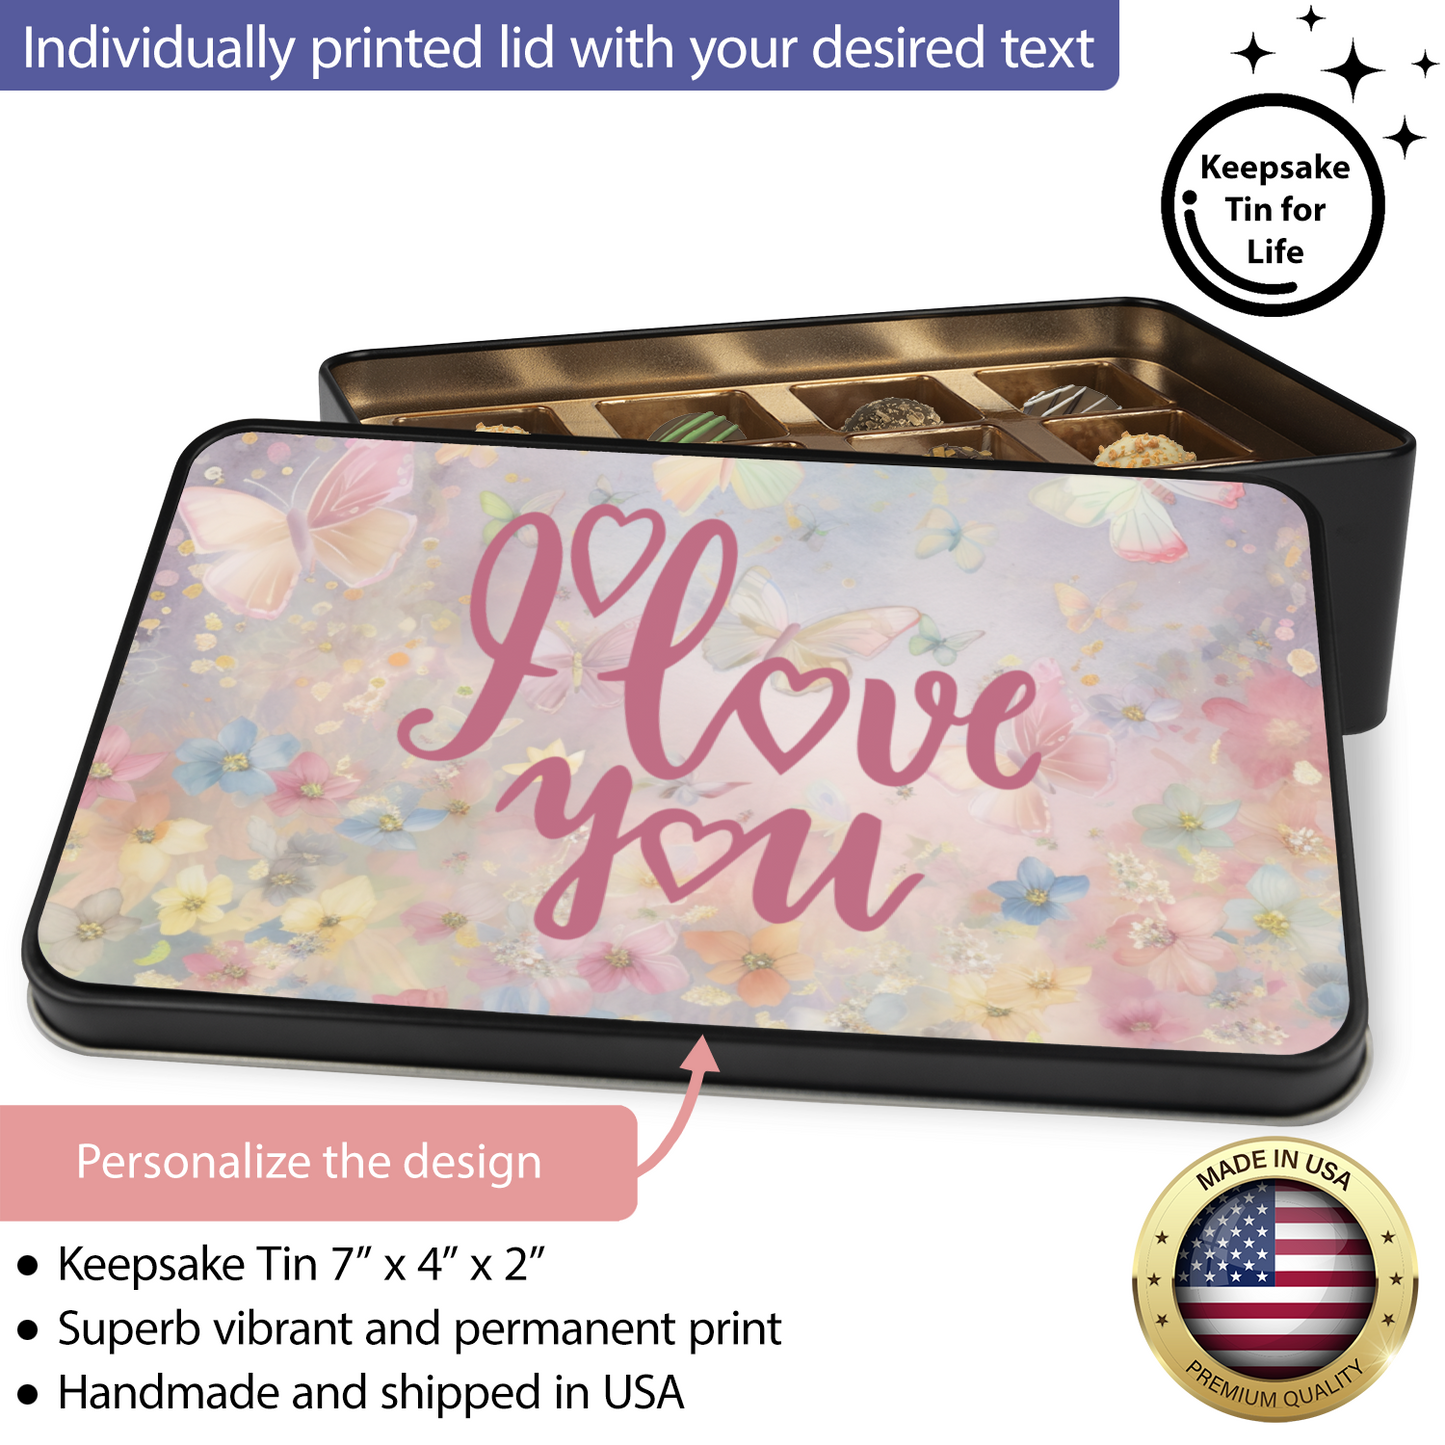 I Love You Butterfly Truffle Box - Assorted Flavors in Charming Keepsake Tin